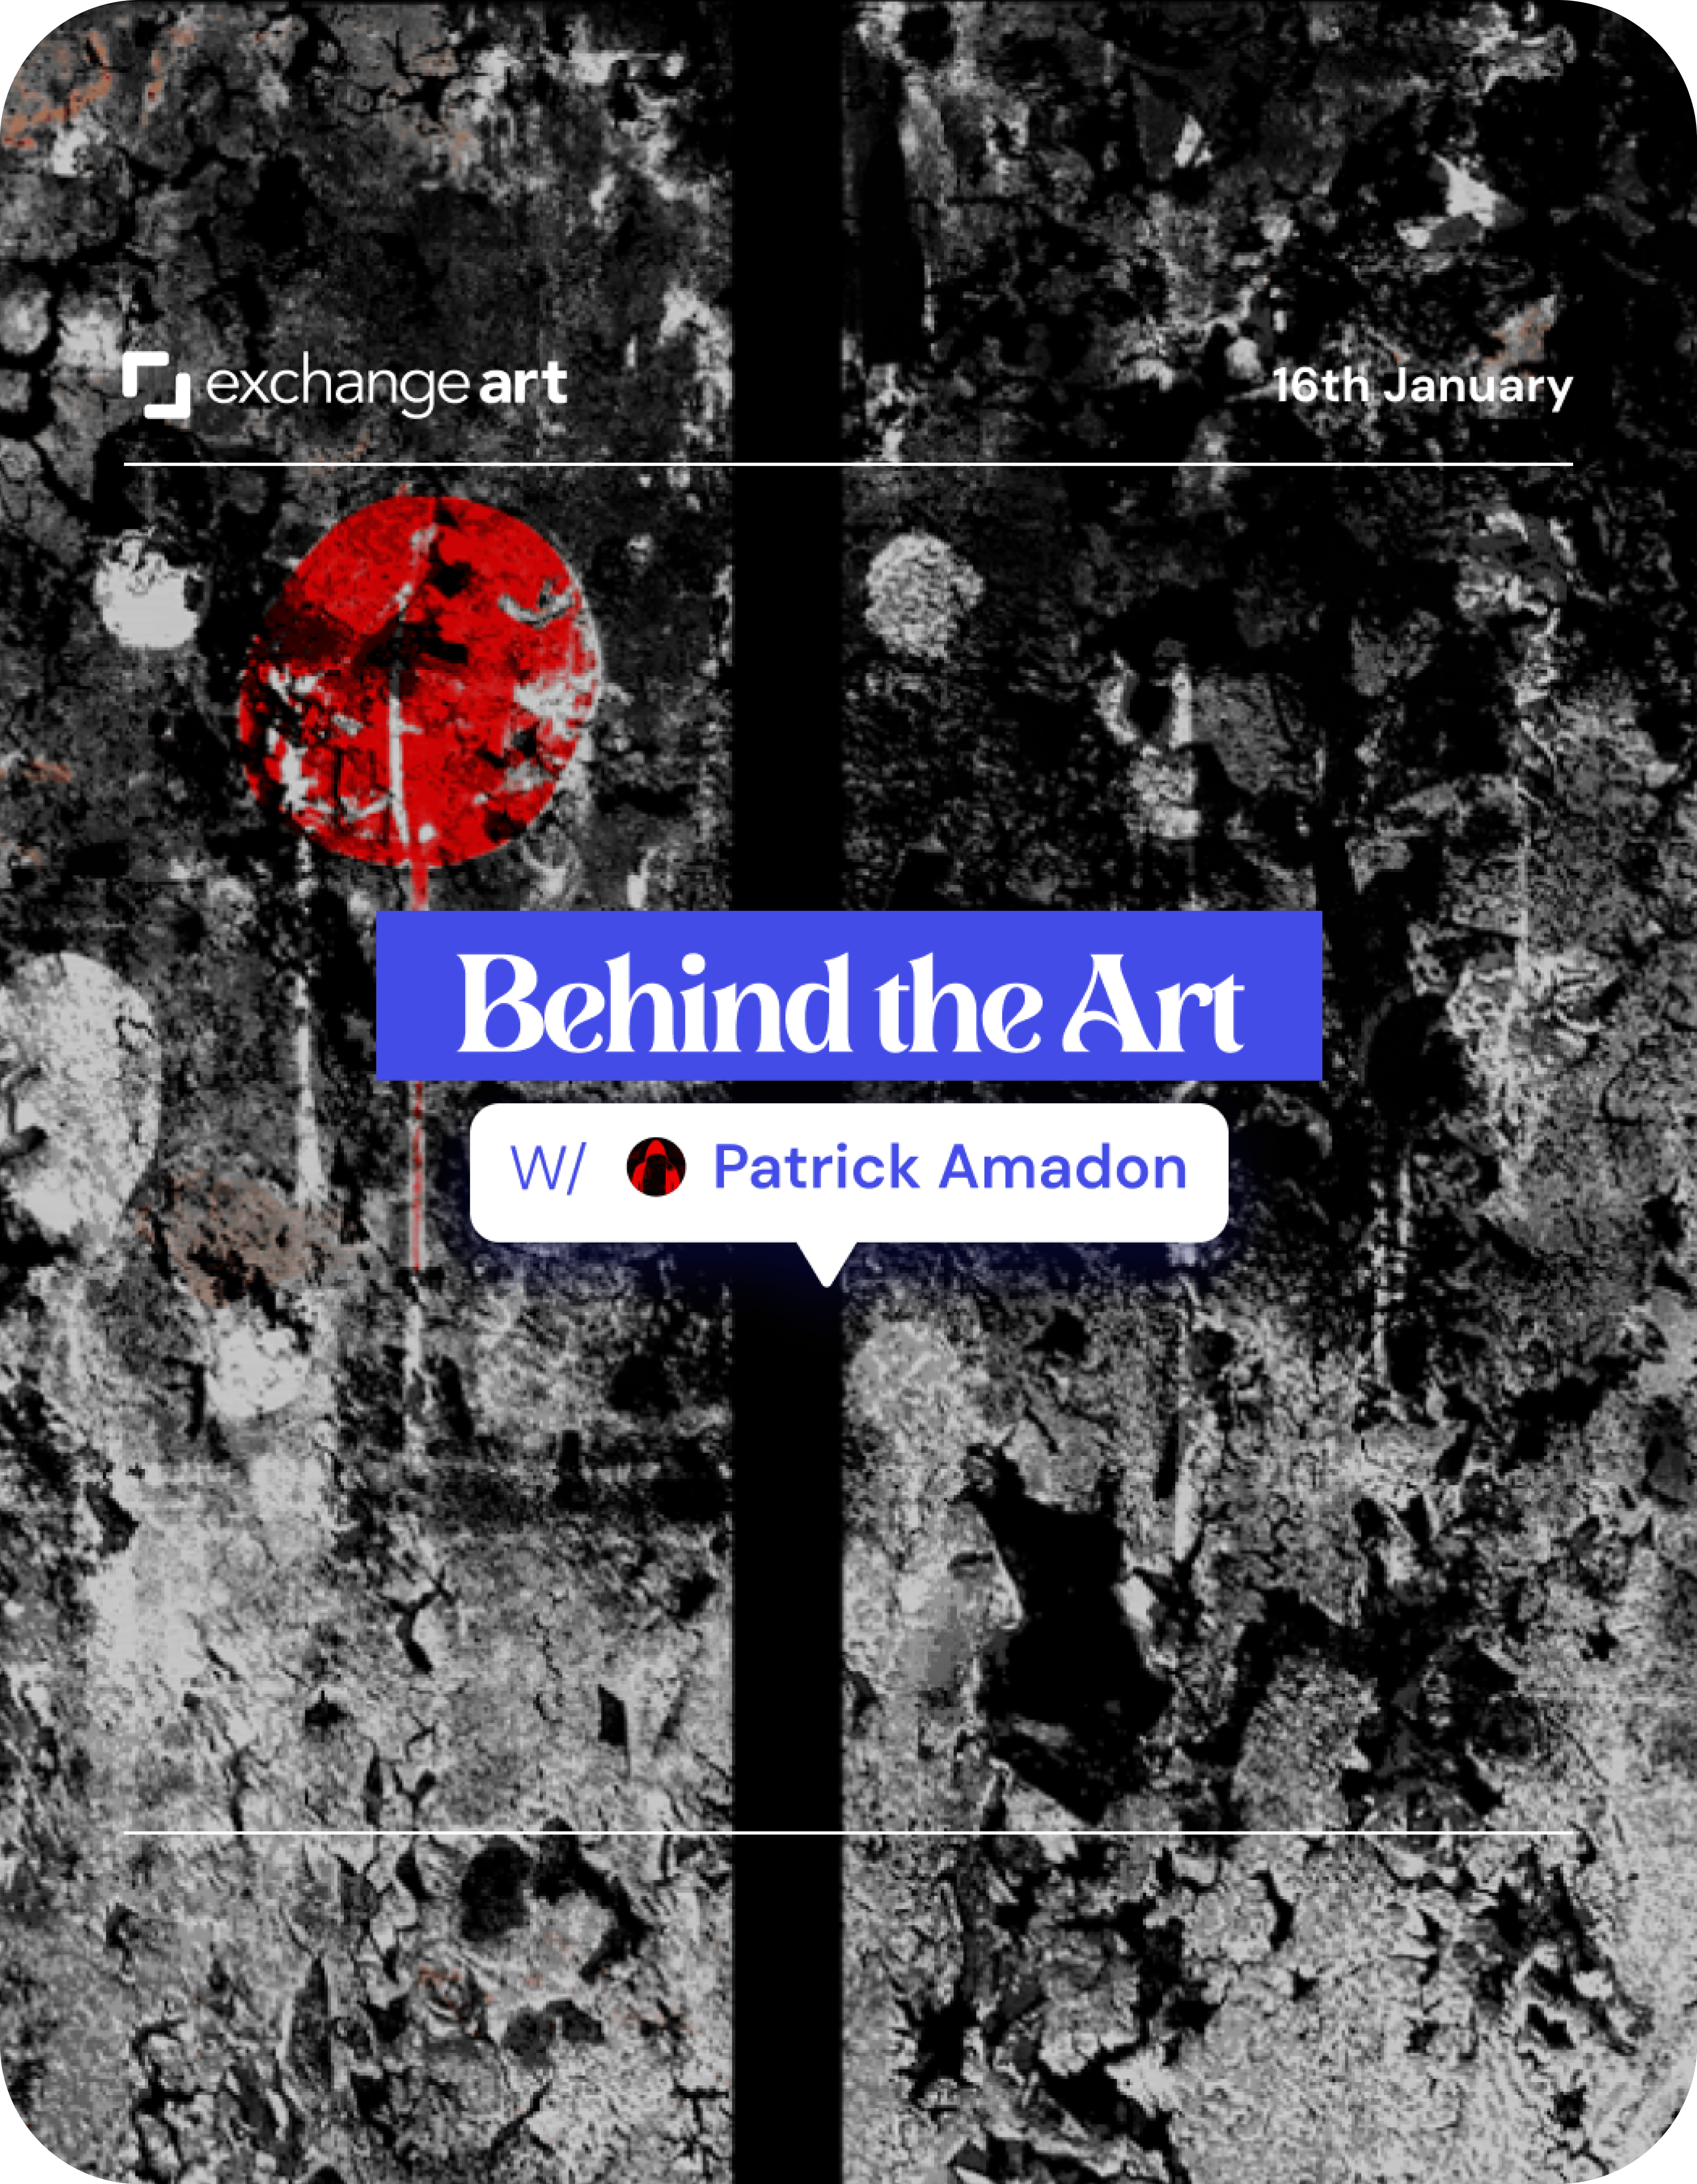 Behind the Art with Patrick Amadon